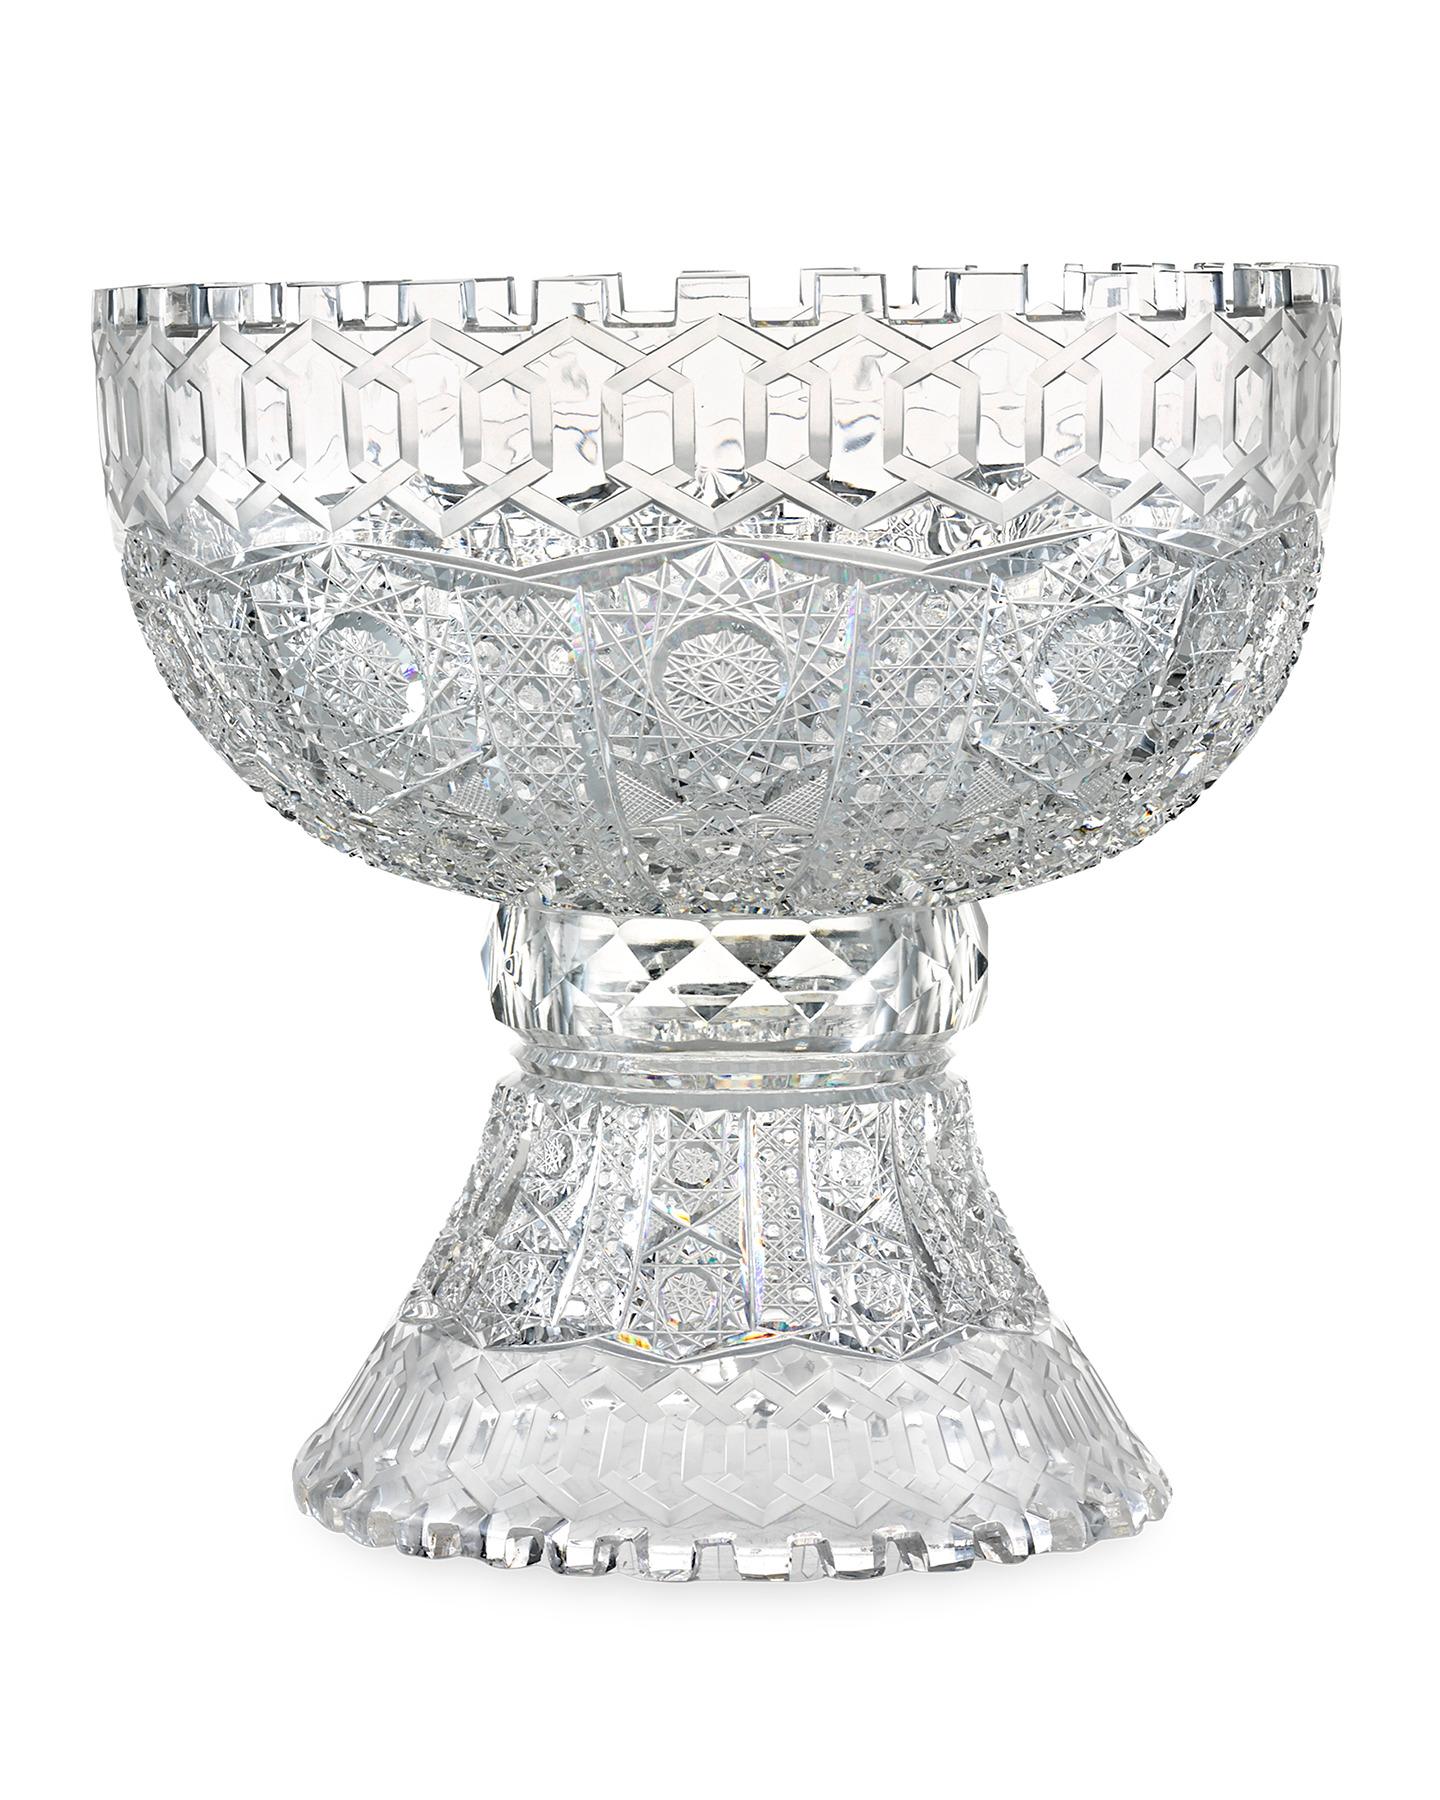 This strikingly beautiful and rare American Brilliant Period cut-glass punch bowl set comes replete with eight cups to sip from and a matching serving ladle. Crafted in the scarce and hotly sought-after Alhambra pattern, this opulent cut-glass